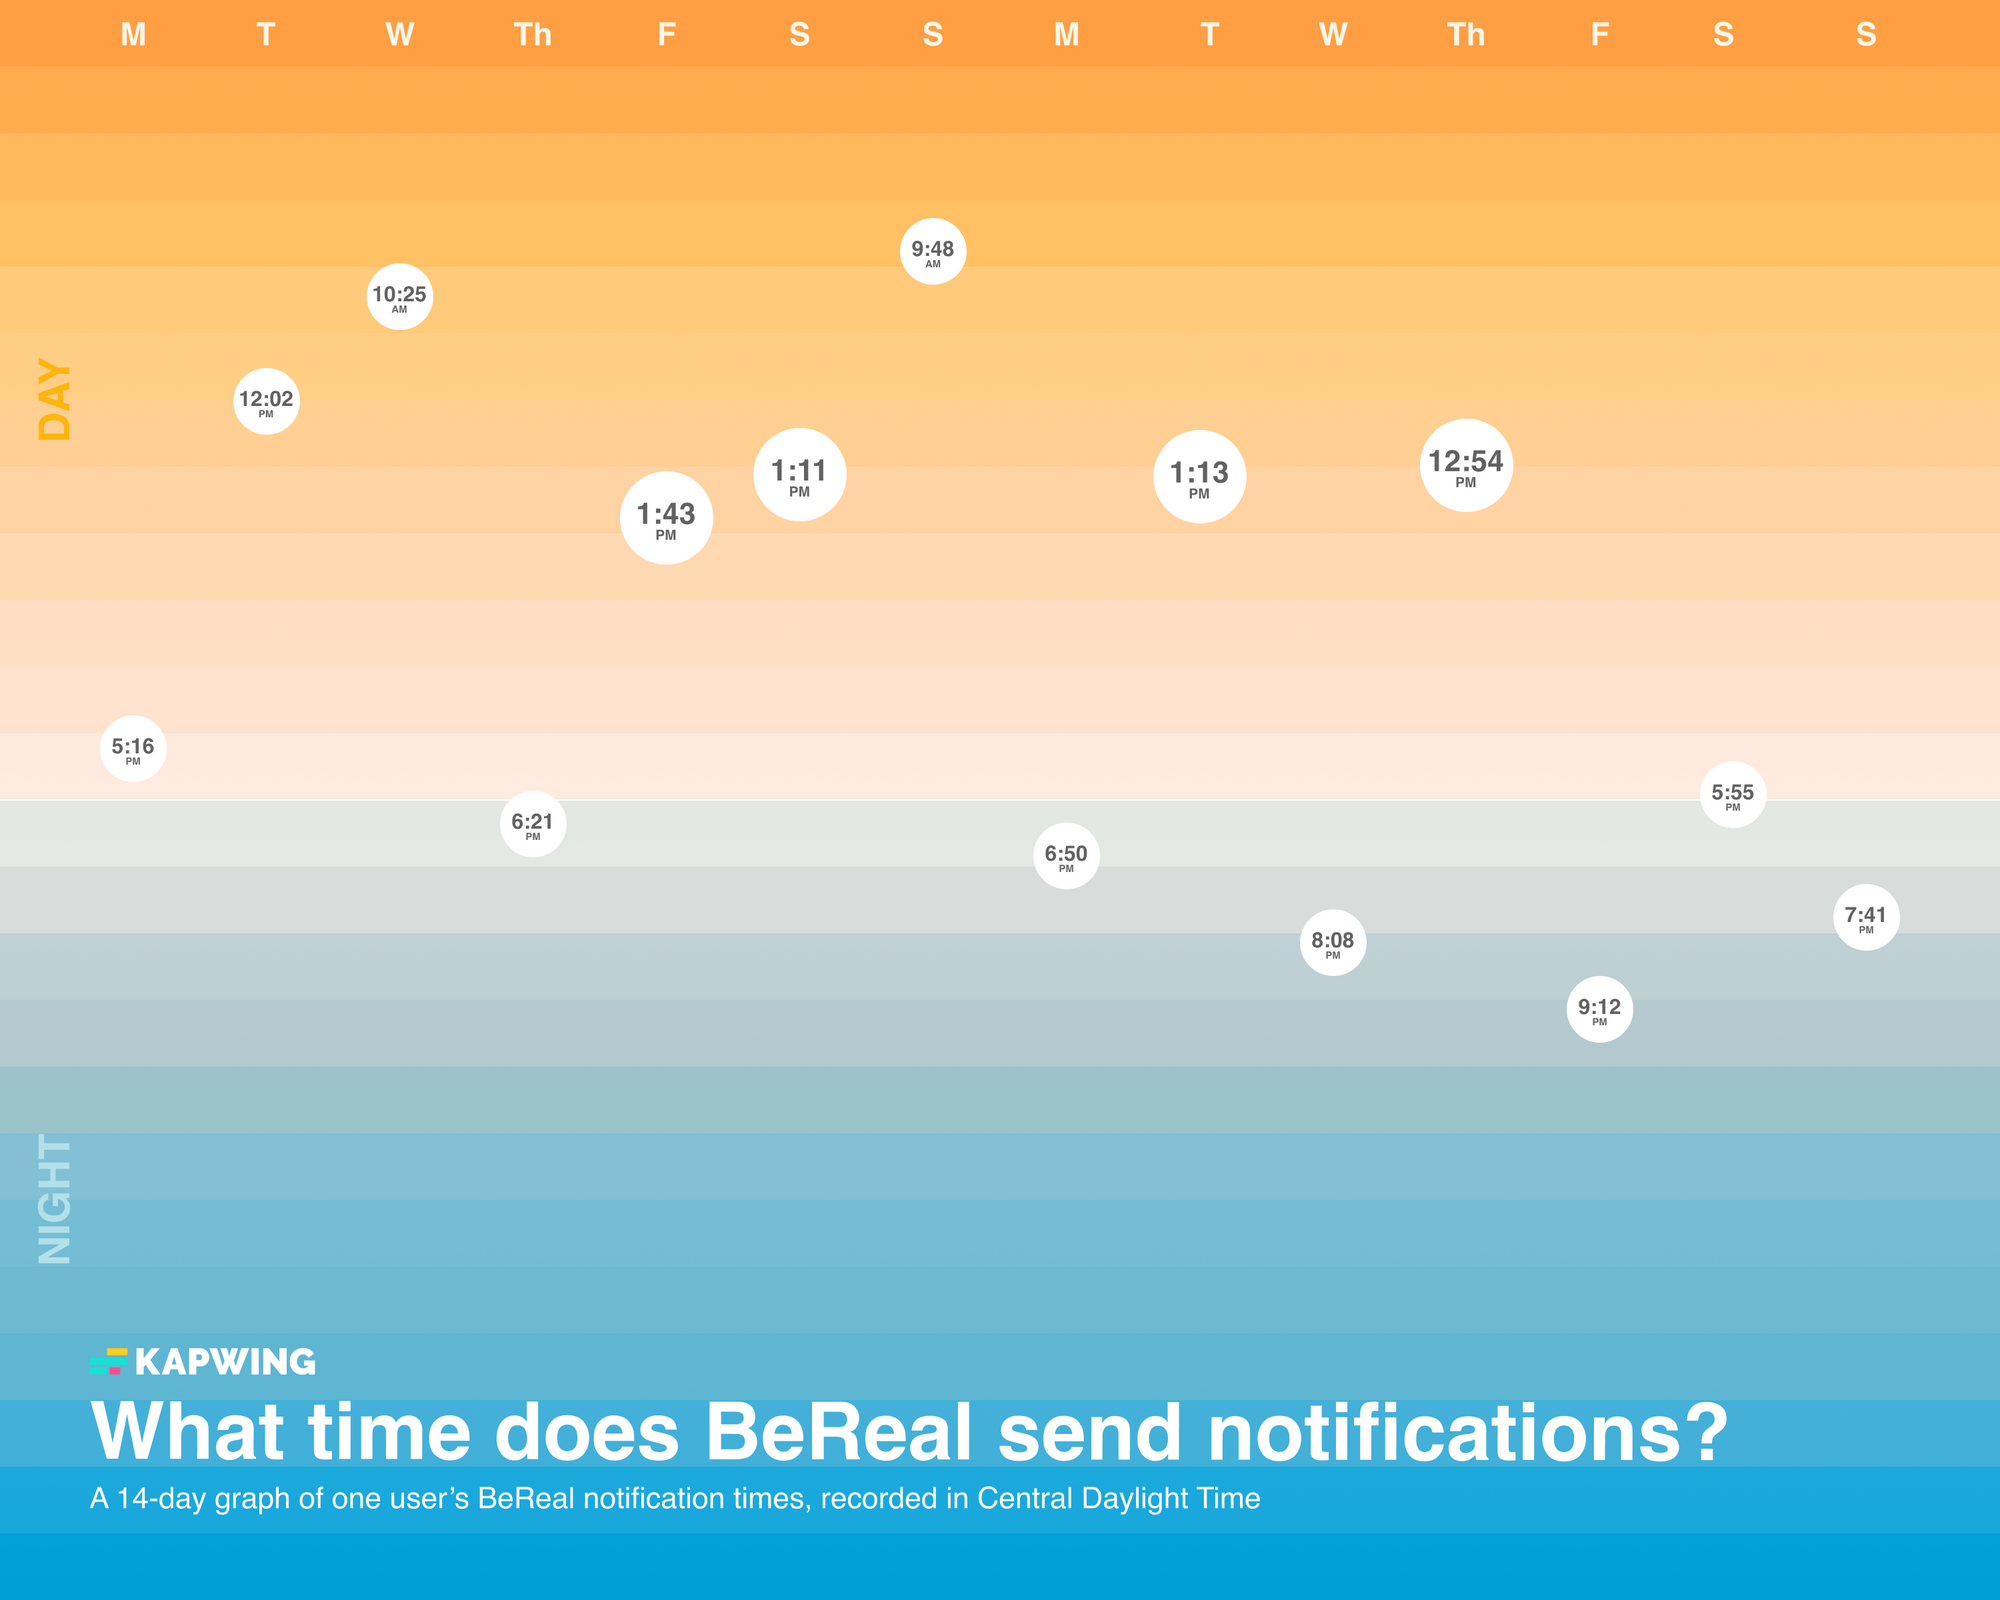 A 14-day graph of one user's BeReal notification times, recorded in CST. 